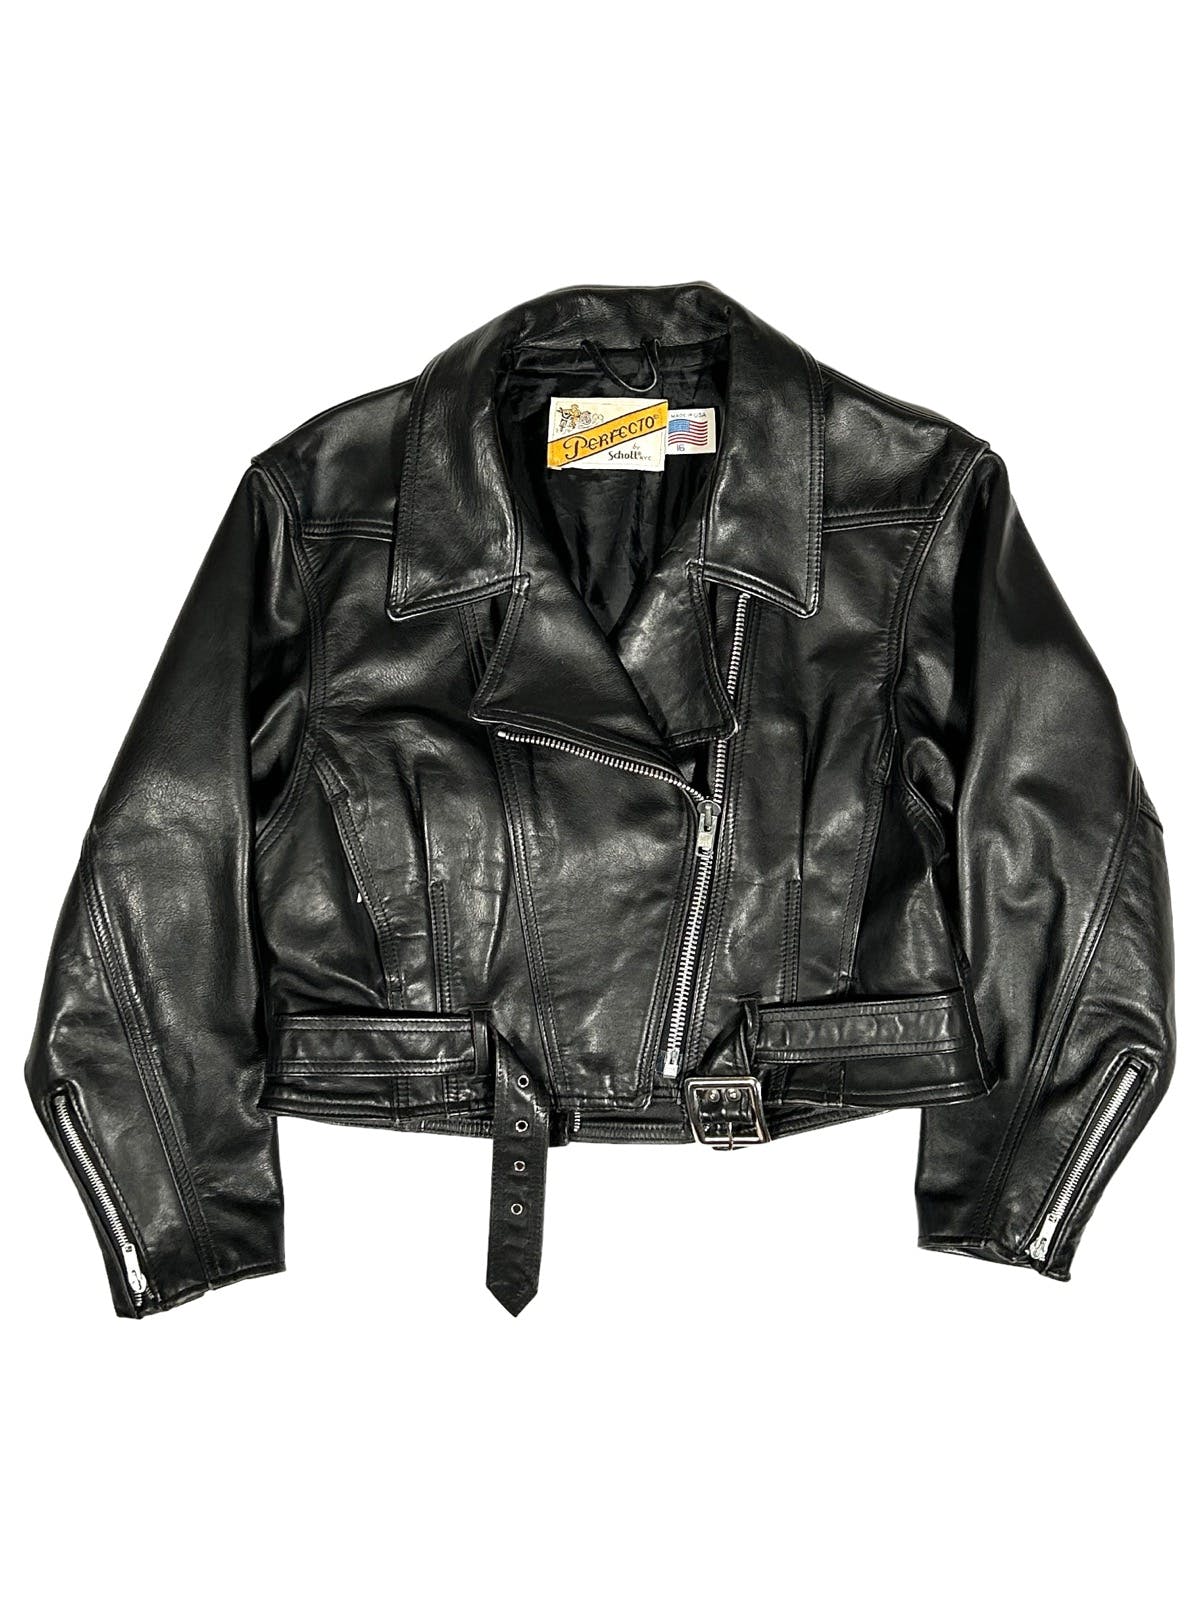 Vintage Schott Perfecto Cropped Leather Jacket - 1